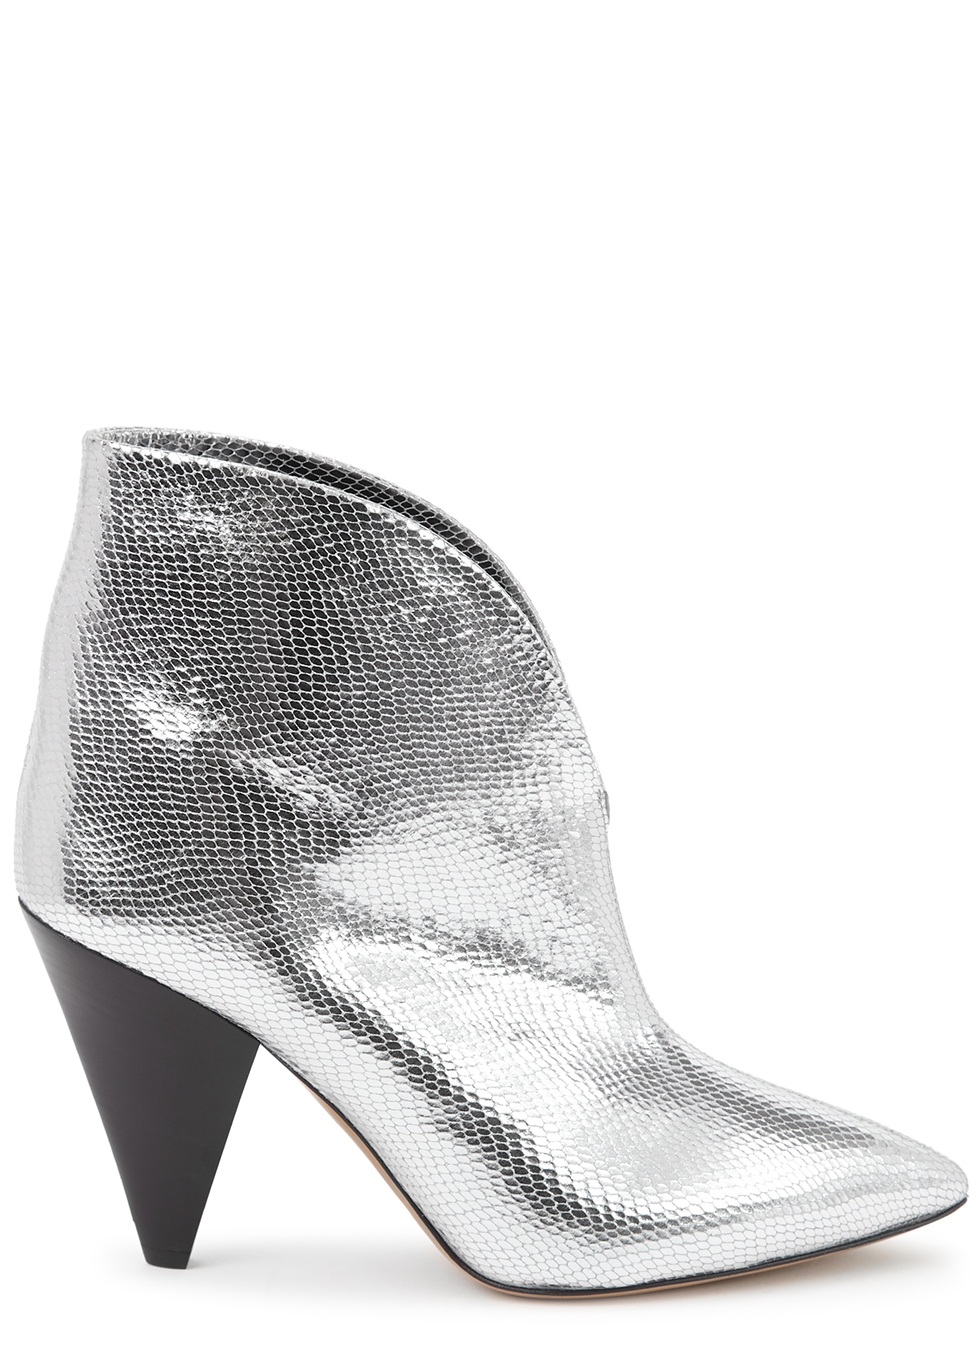 Adiel 100 silver leather ankle boots